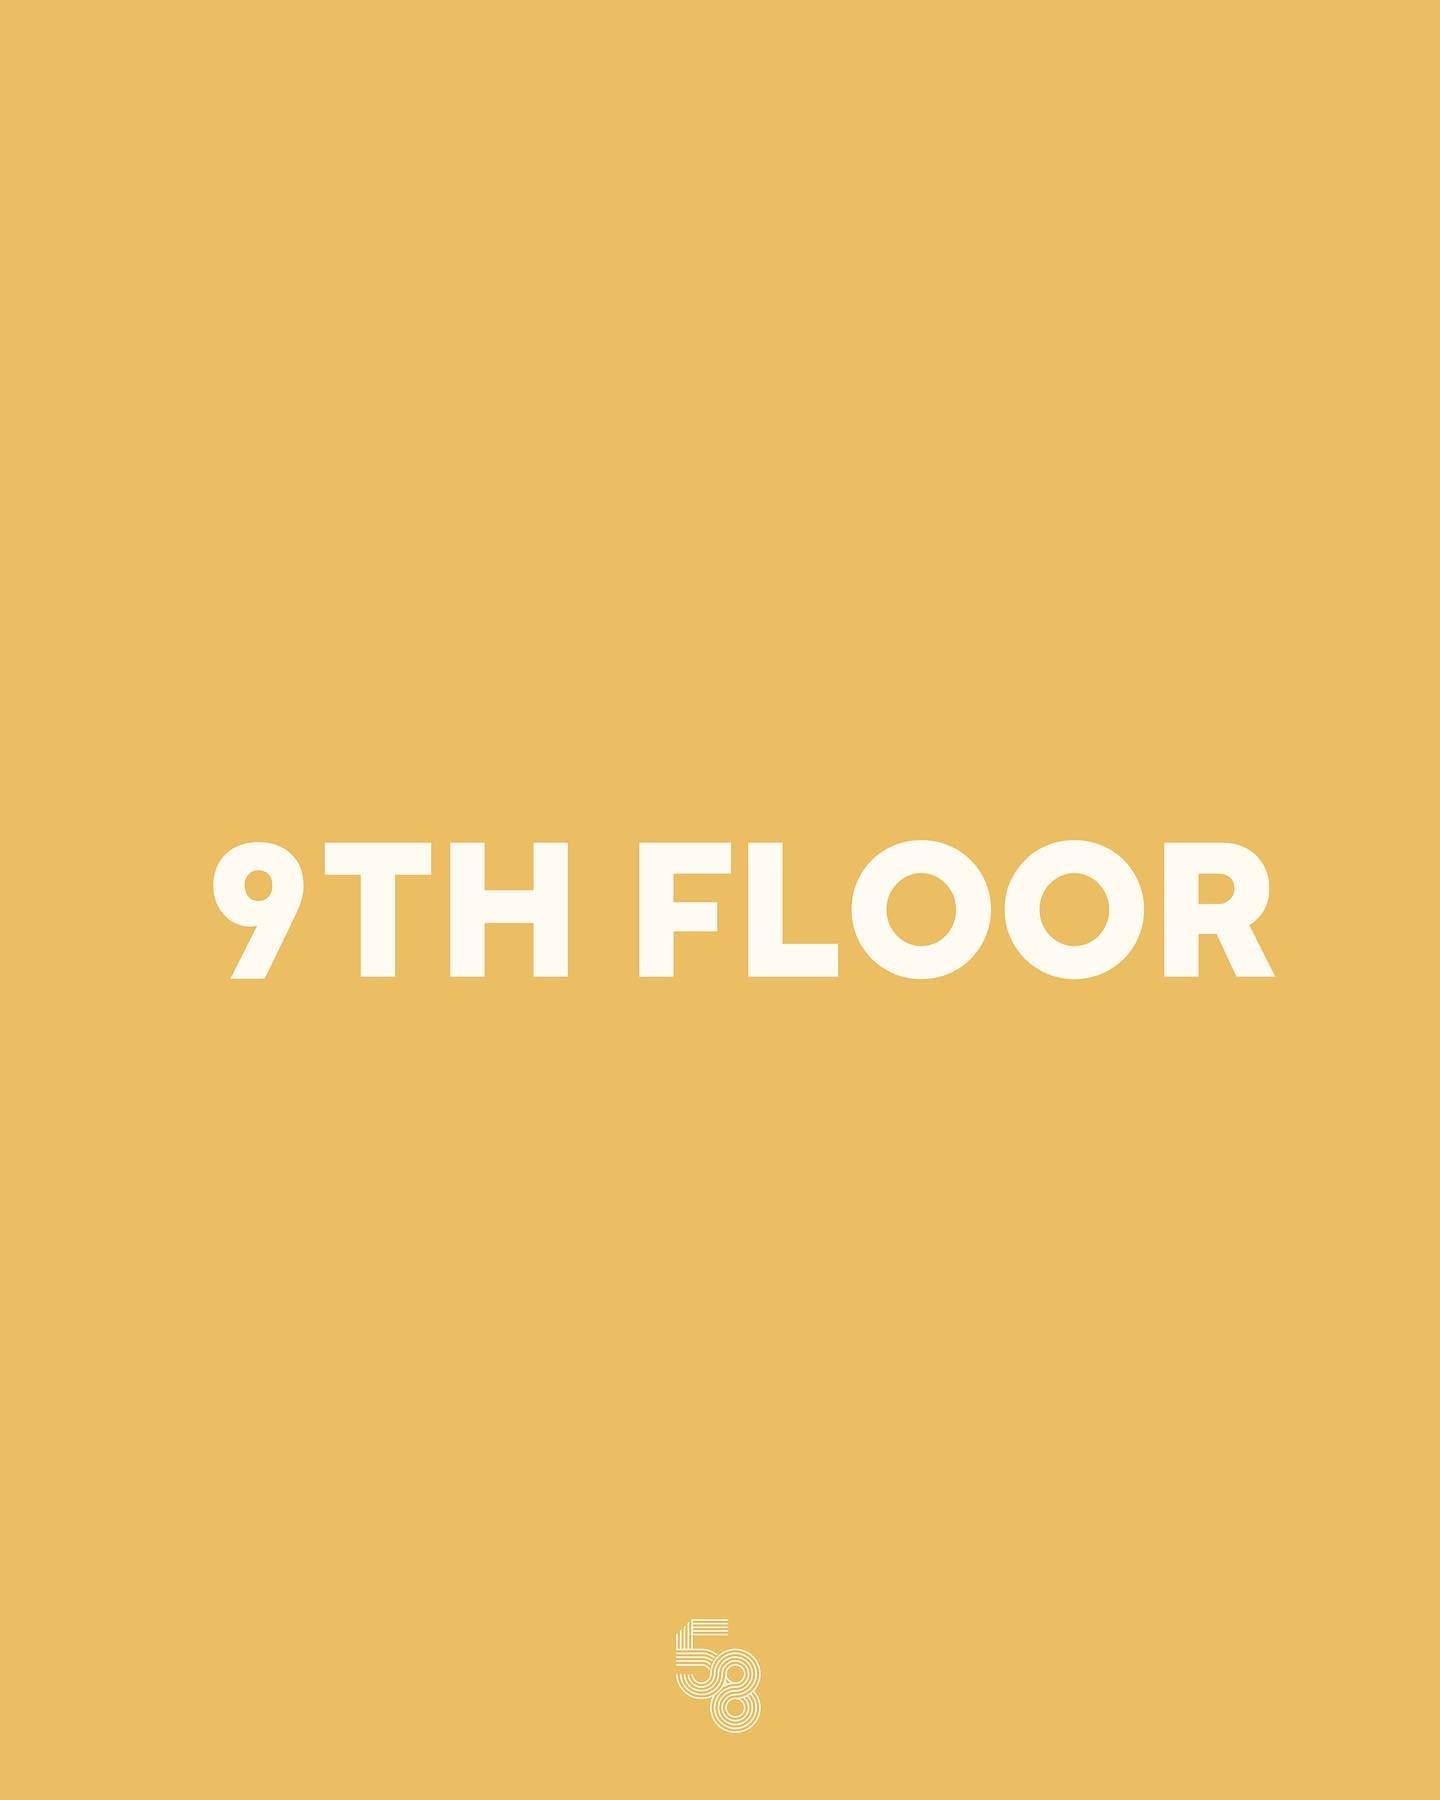 Swipe up to unlock our 9TH FLOOR 🌆🌞
We are open on both floor today, from 12PM to 1AM!

Access today : Rue de l&rsquo;Ev&ecirc;que 01 - 1000 Brussels